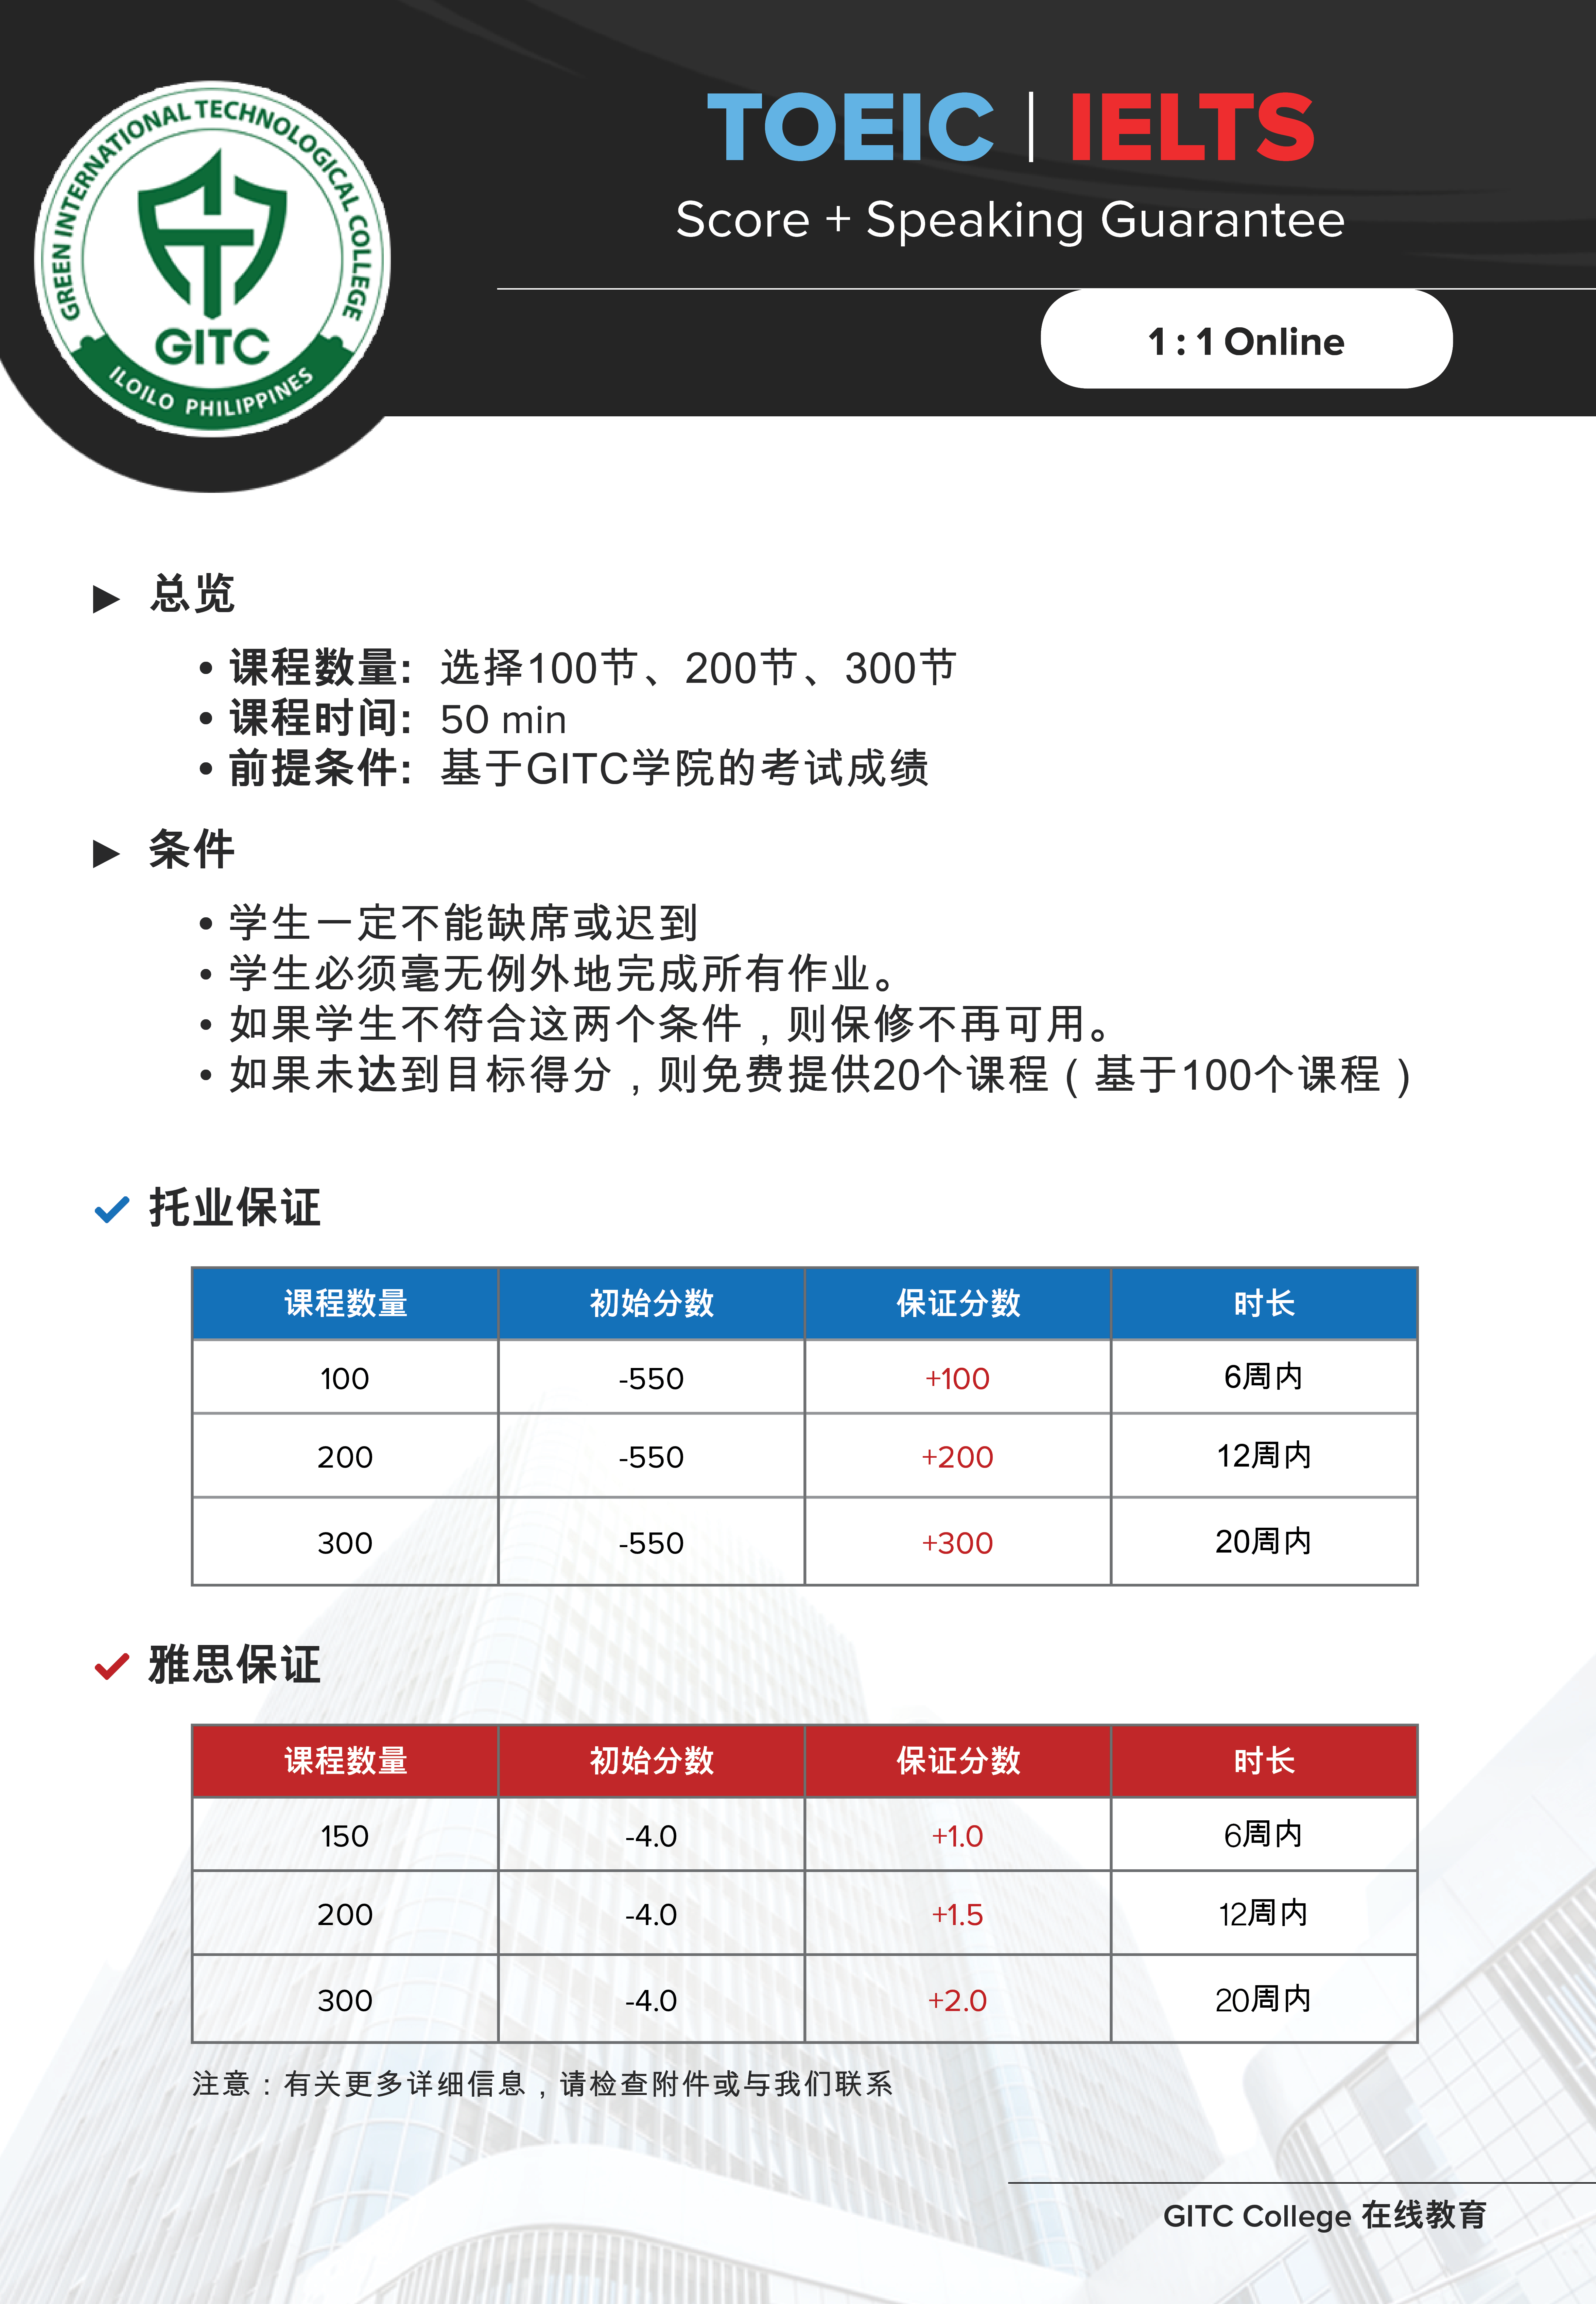 V0.1_TOEIC_IELTS_SIMPLIFIED.png(1.28 MB)